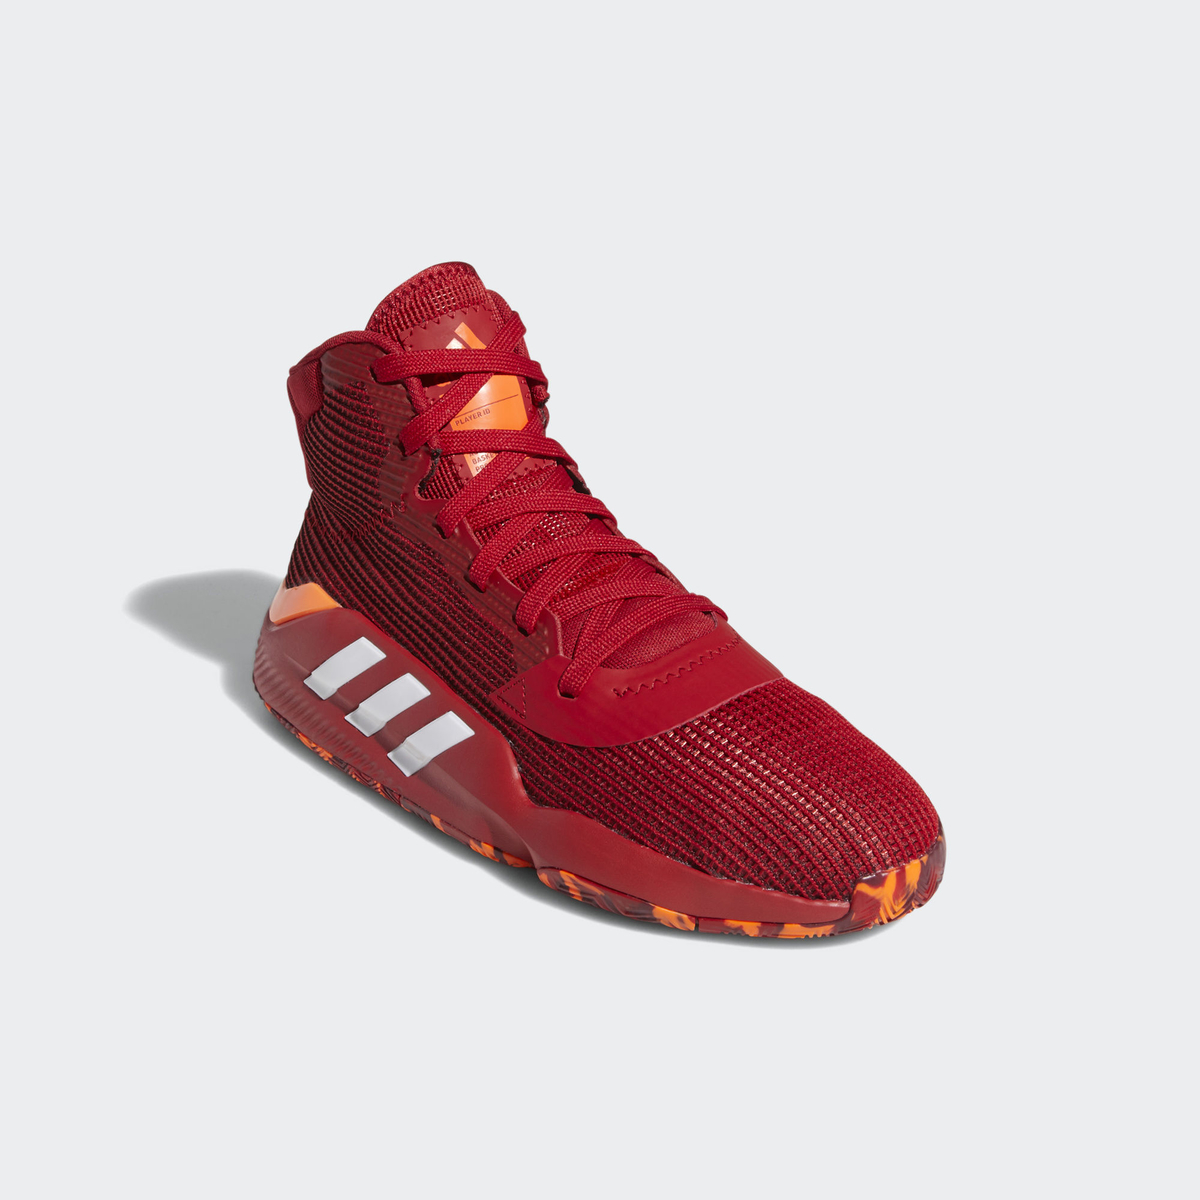 Ruina batería marido A First Look at the adidas Pro Bounce 2019 - WearTesters